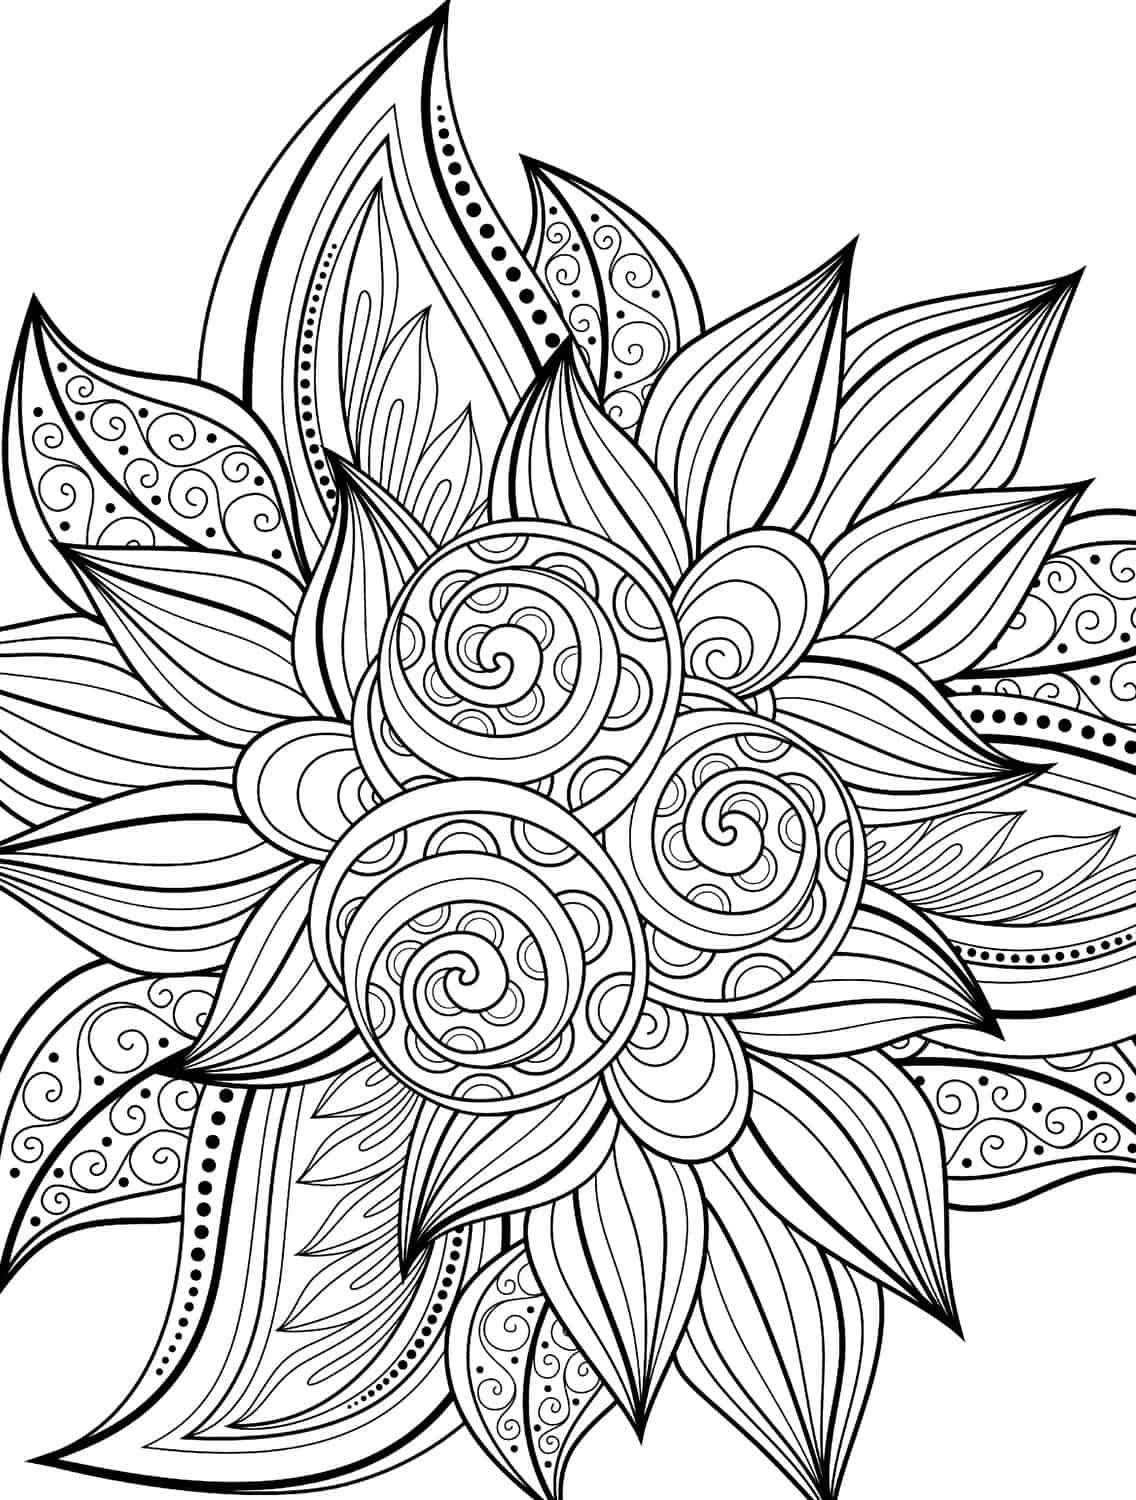 Adult Coloring Pages Free Printable
 10 Free Printable Holiday Adult Coloring Pages